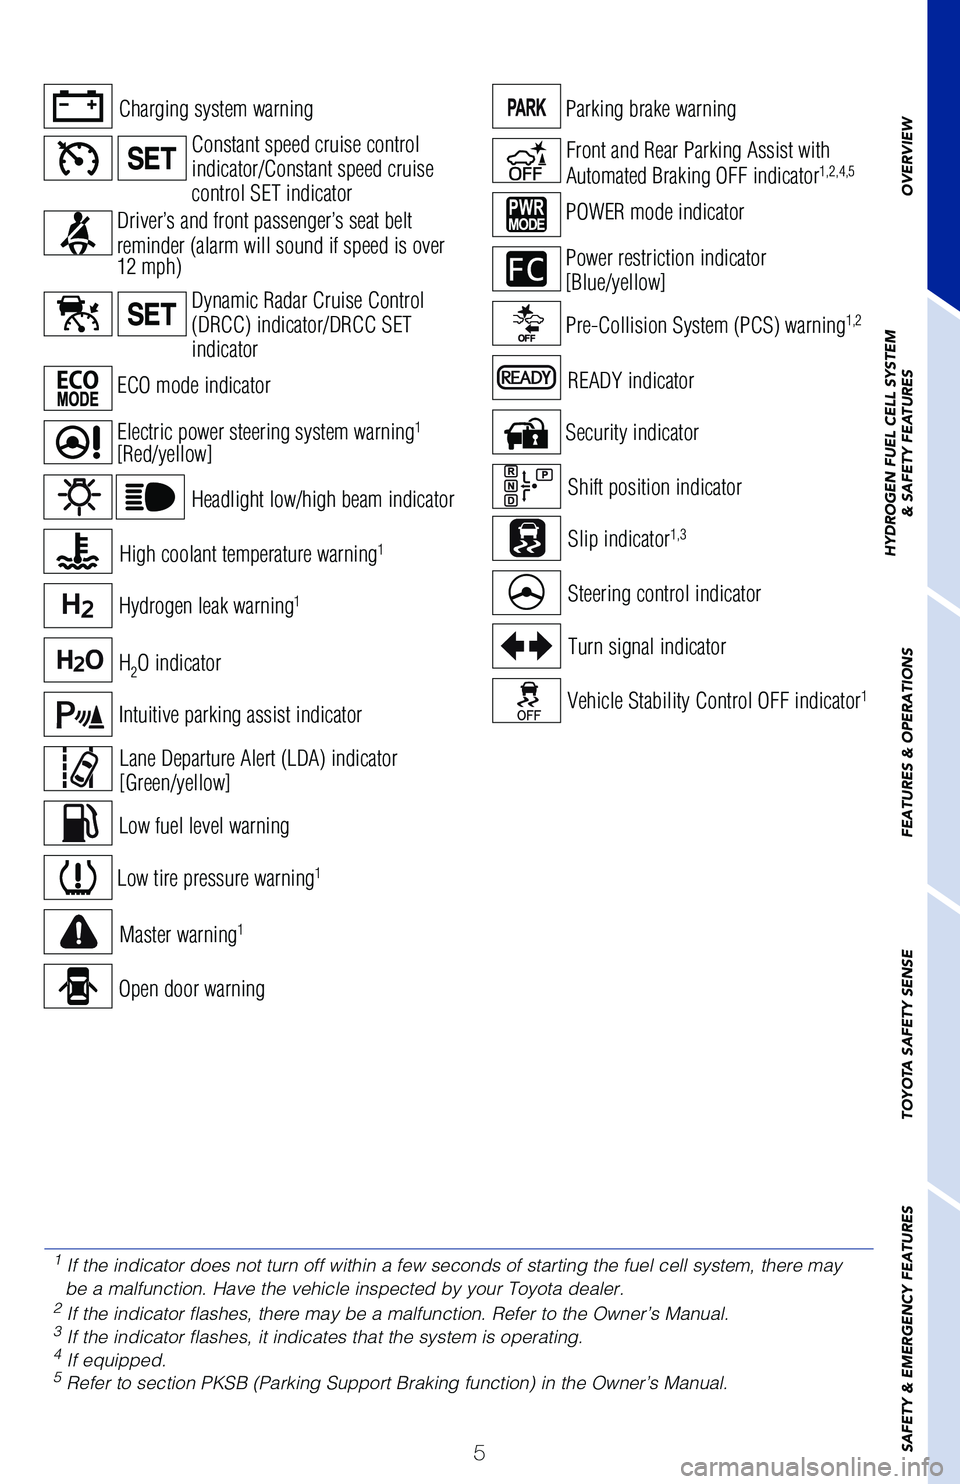 TOYOTA MIRAI 2020  Owners Manual (in English) 5
Hydrogen leak warning
1
High coolant temperature warning1Slip indicator1,3
Steering control indicator
Vehicle Stability Control OFF indicator1
Low tire pressure warning1
Security indicator
Master wa